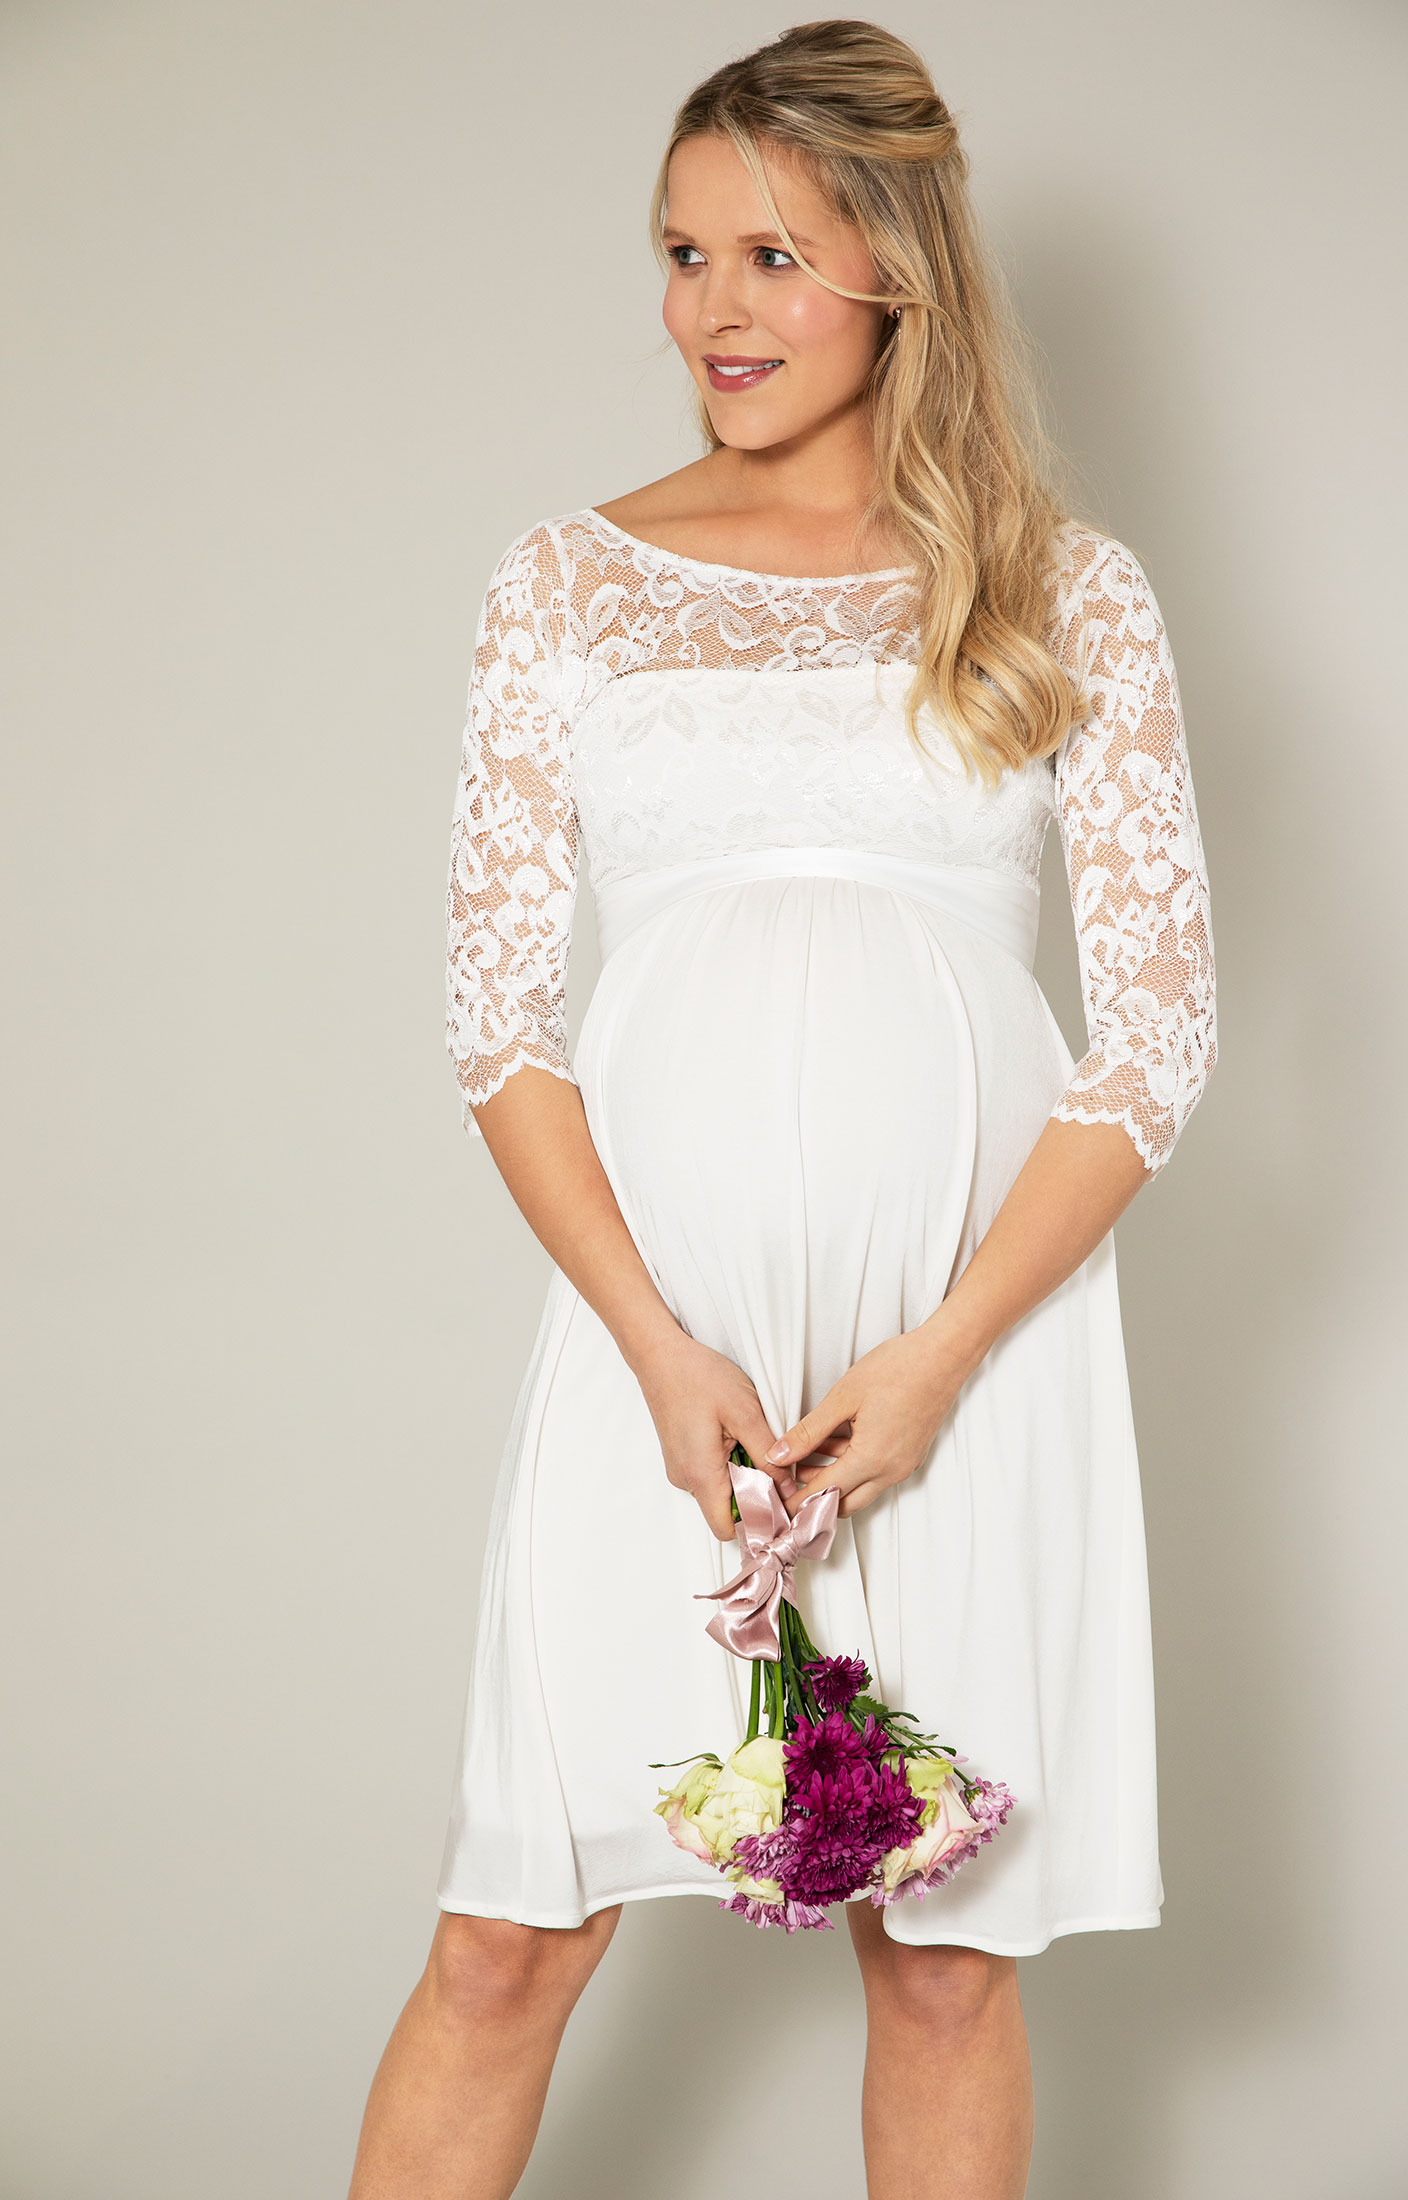 Lillian Lace Maternity Wedding Gown Ivory White - Maternity Wedding Dresses,  Evening Wear and Party Clothes by Tiffany Rose US